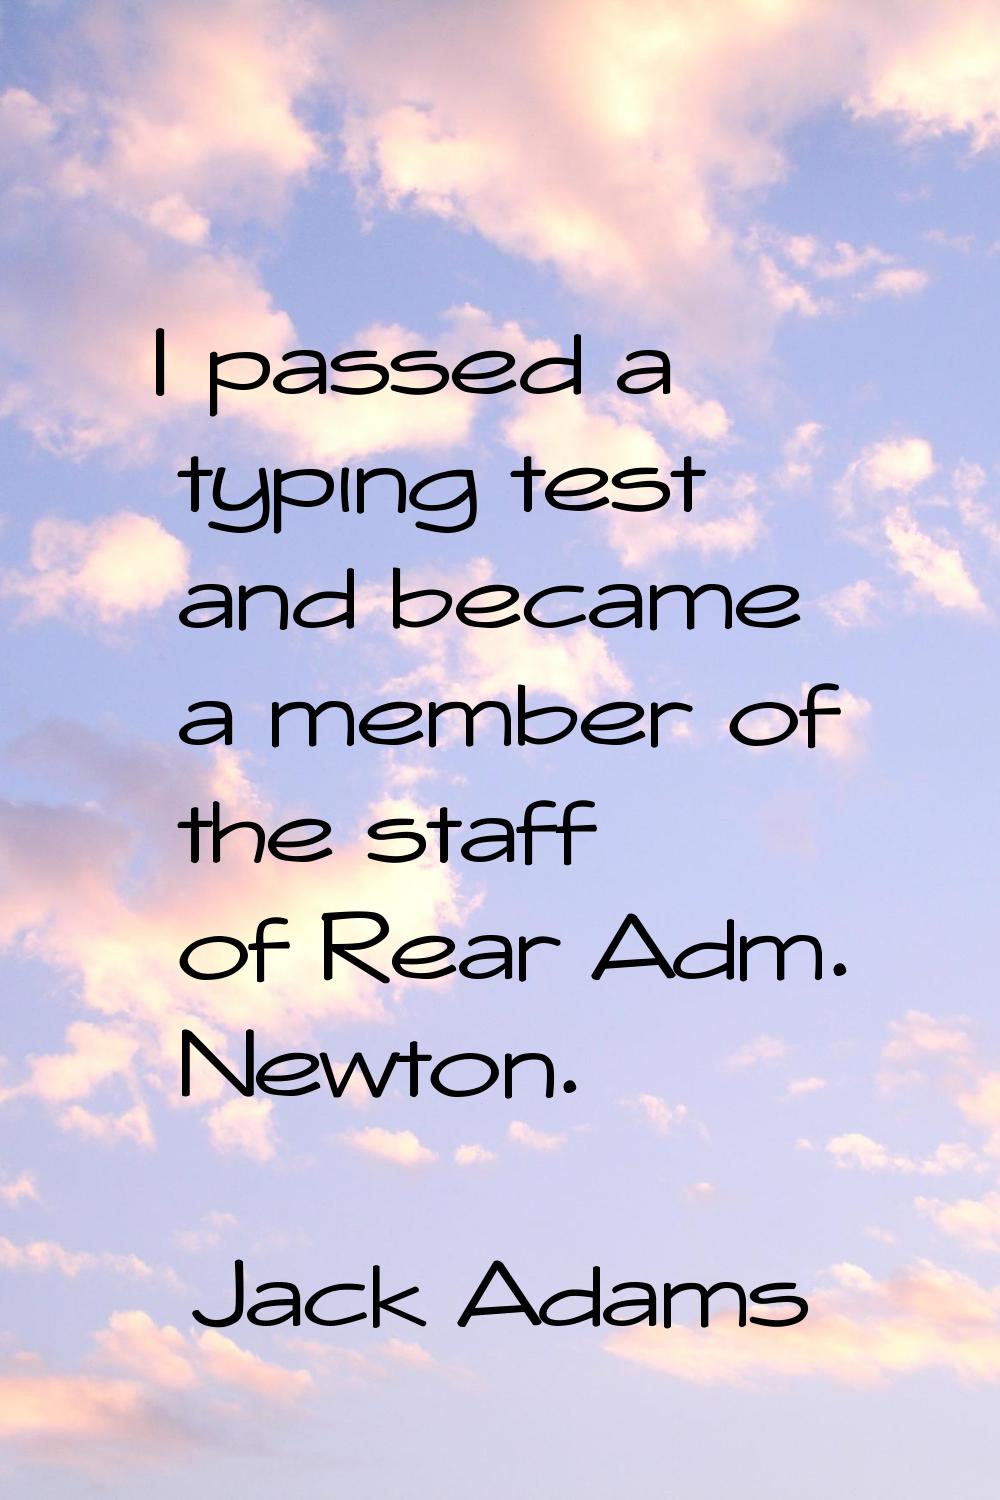 I passed a typing test and became a member of the staff of Rear Adm. Newton.